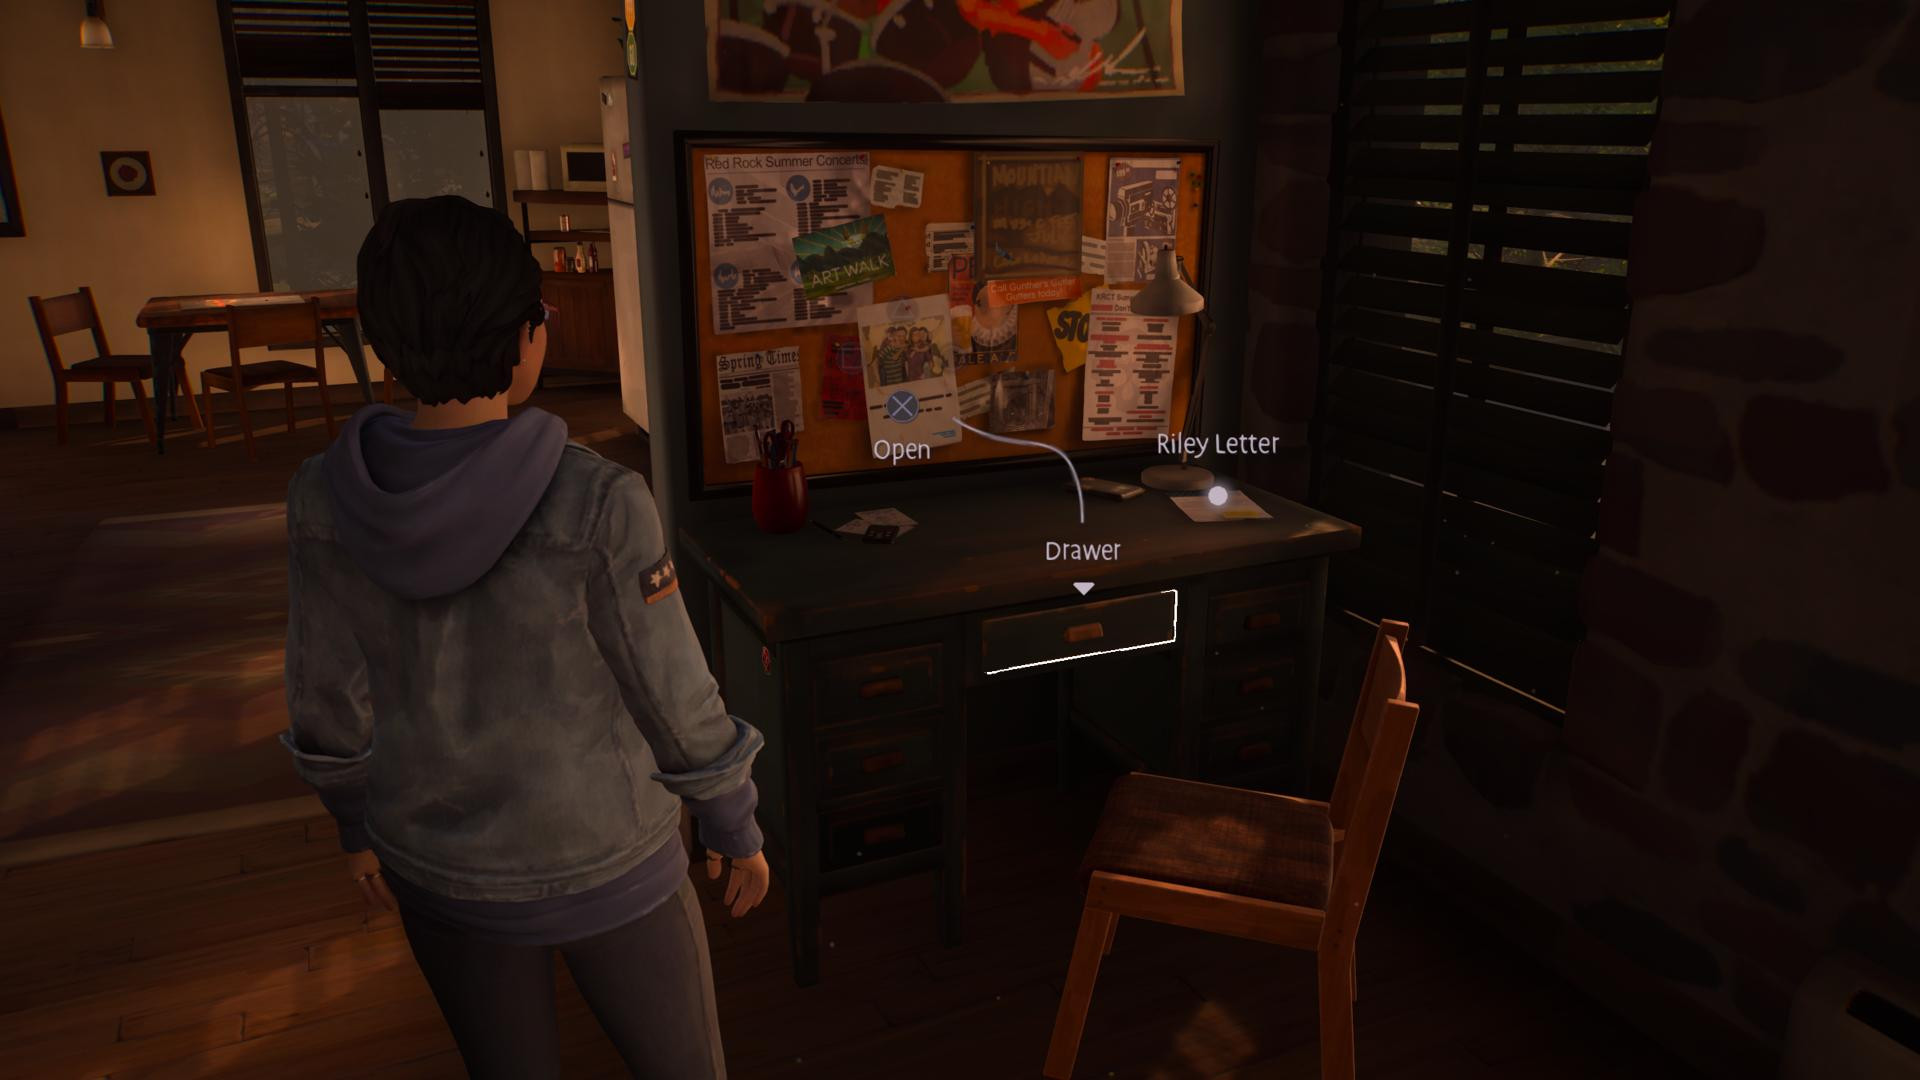 Life is Strange: True Colors - Chapter 2 - All Collectibles & Trophies 🏆  Trophy/Achievement Guide 